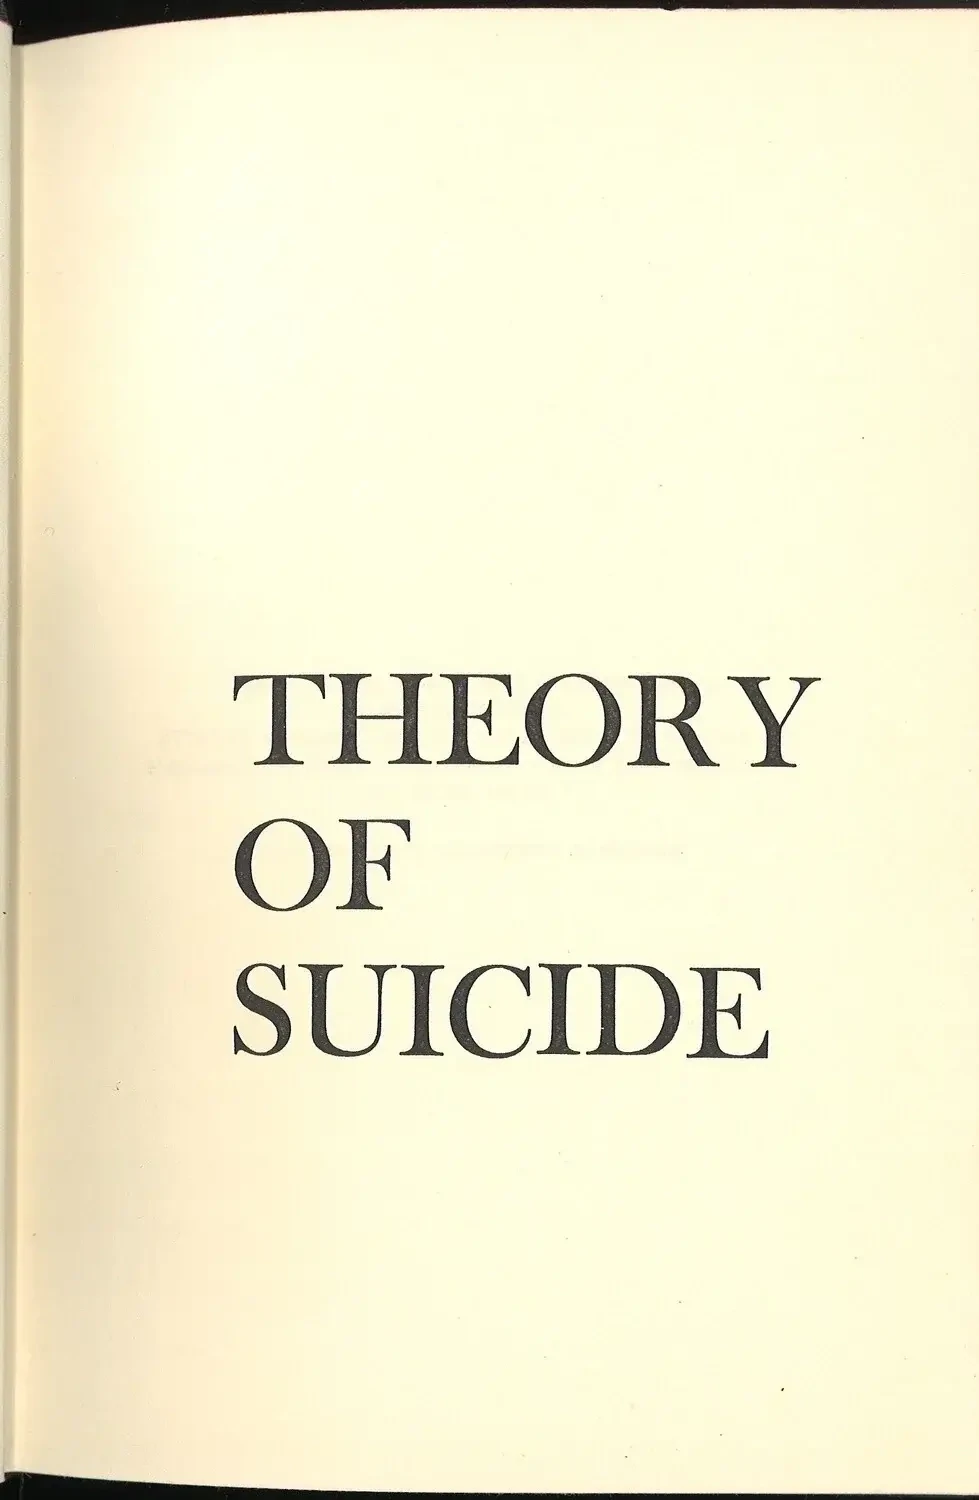 Theory of Suicide by Maurice L. Farber